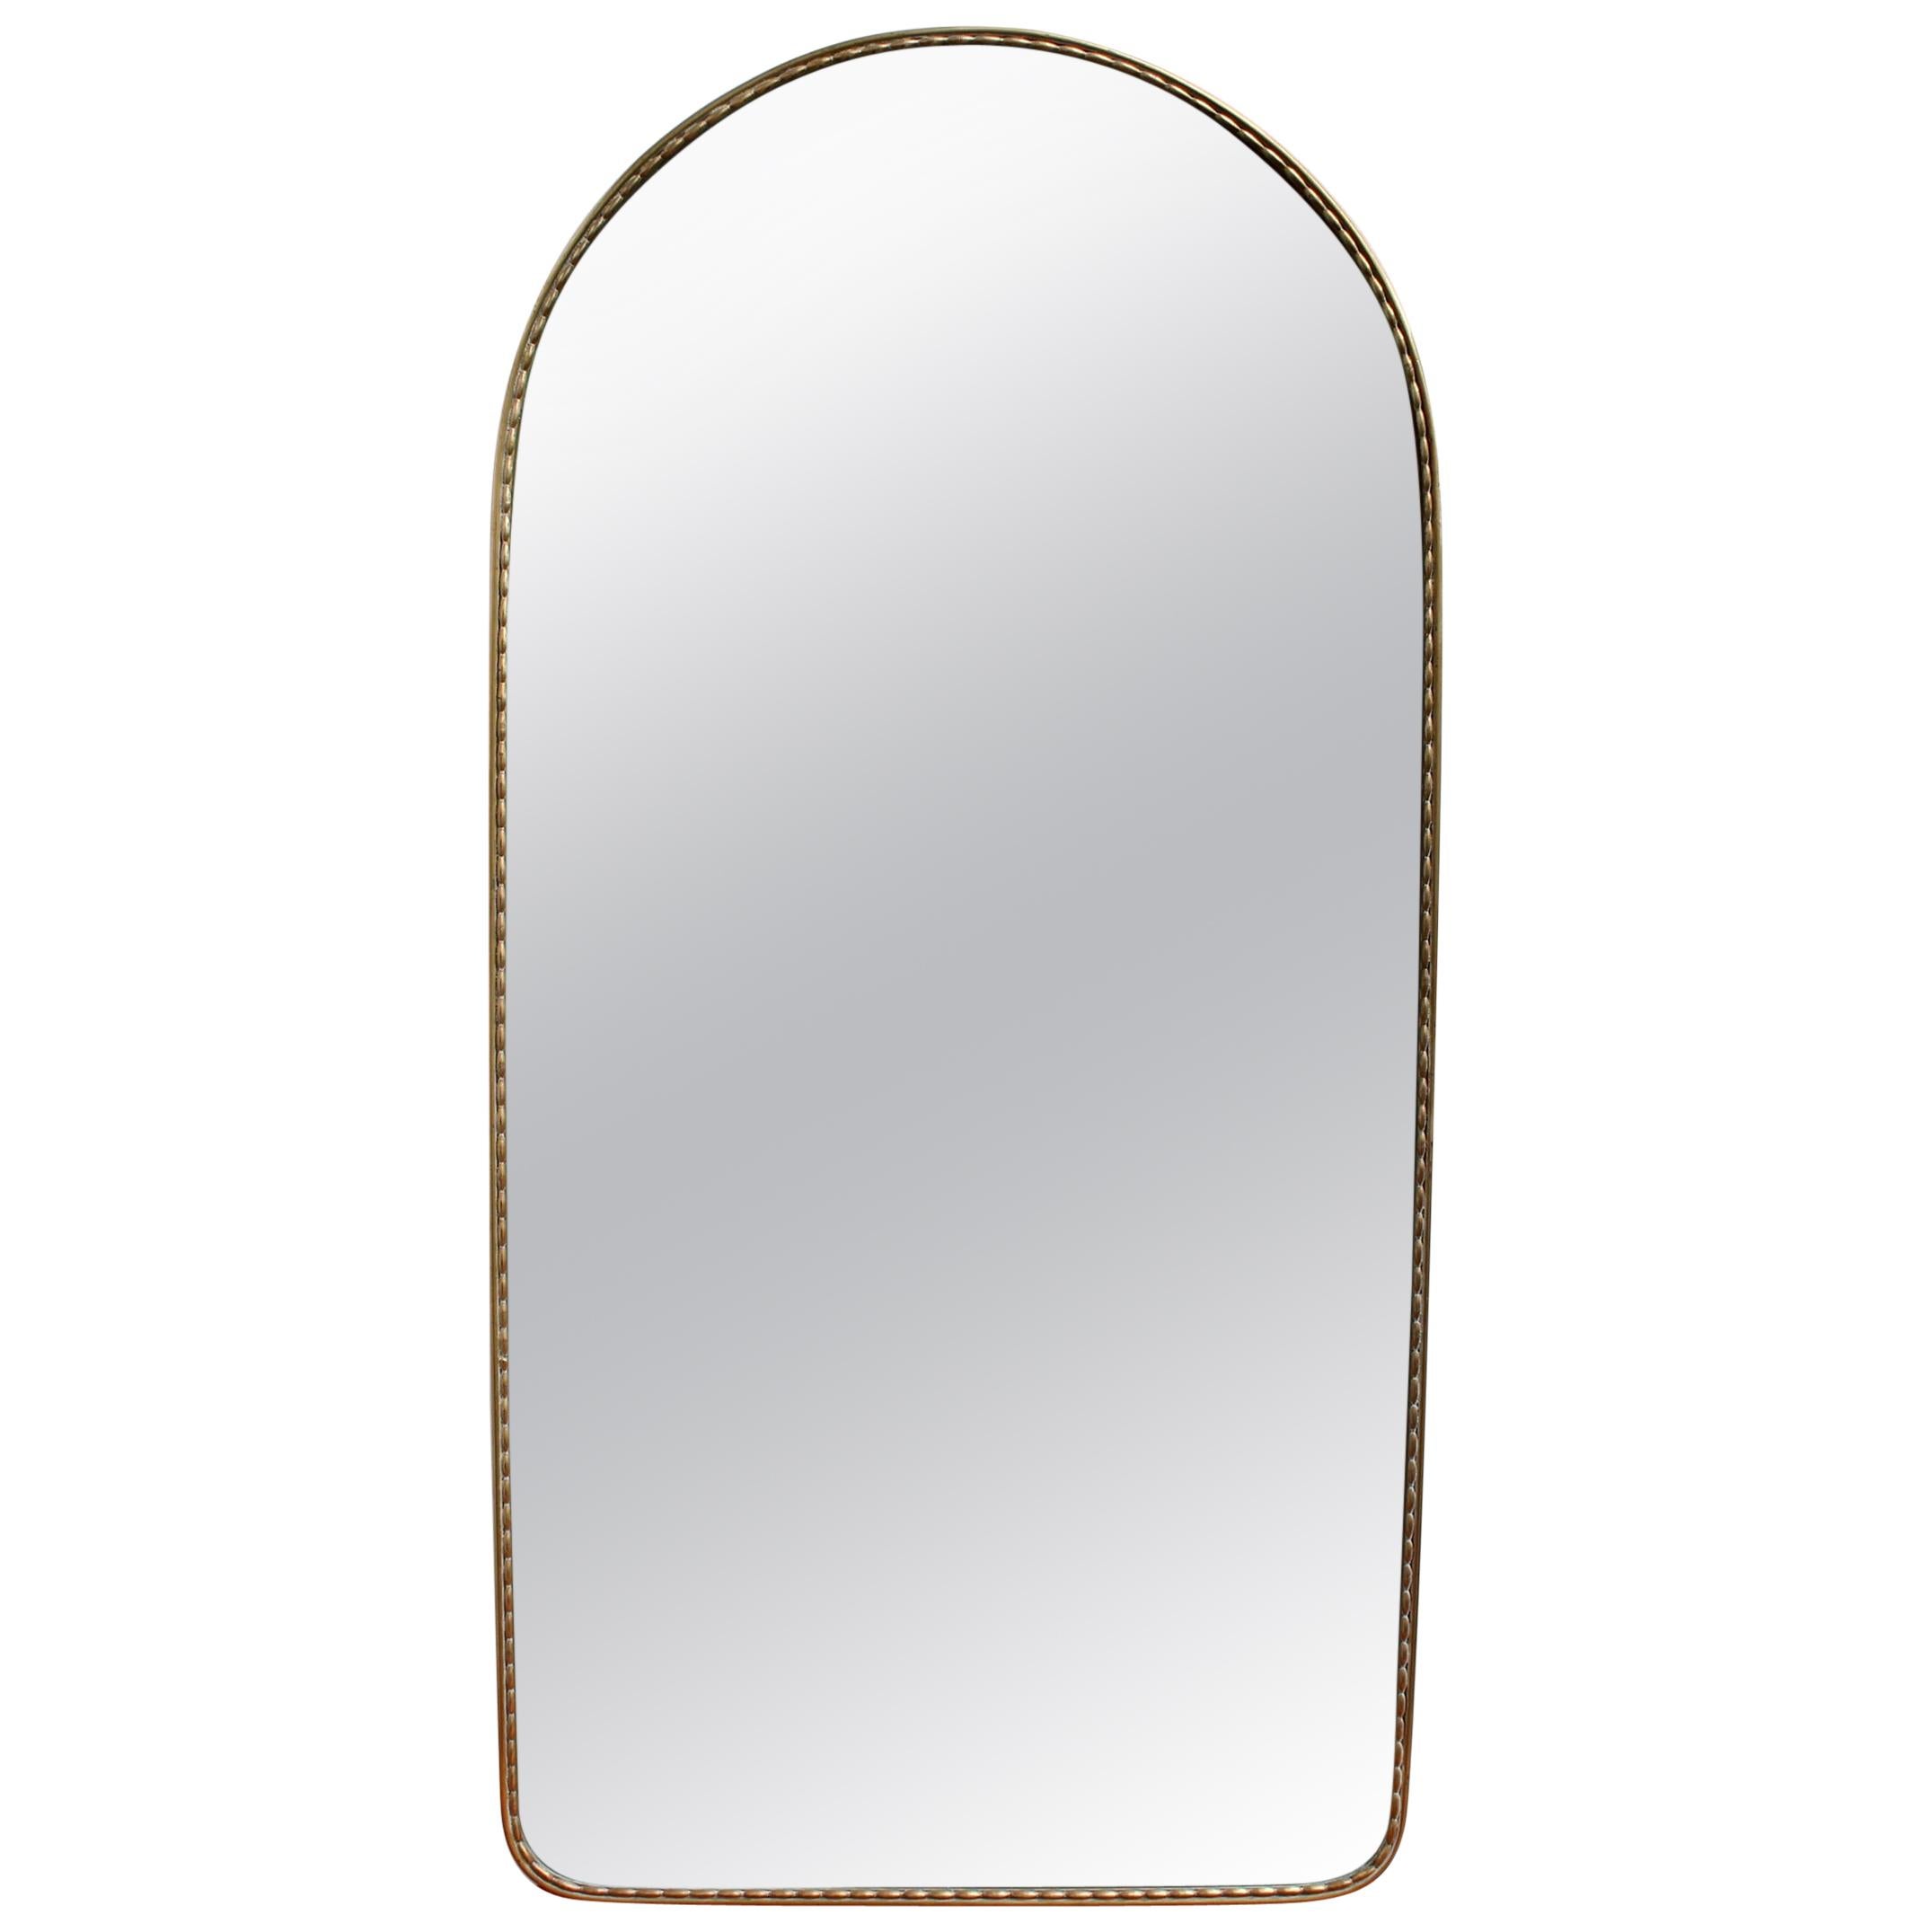 Vintage Italian Arch-Shaped Wall Mirror with Brass Frame, circa 1950s